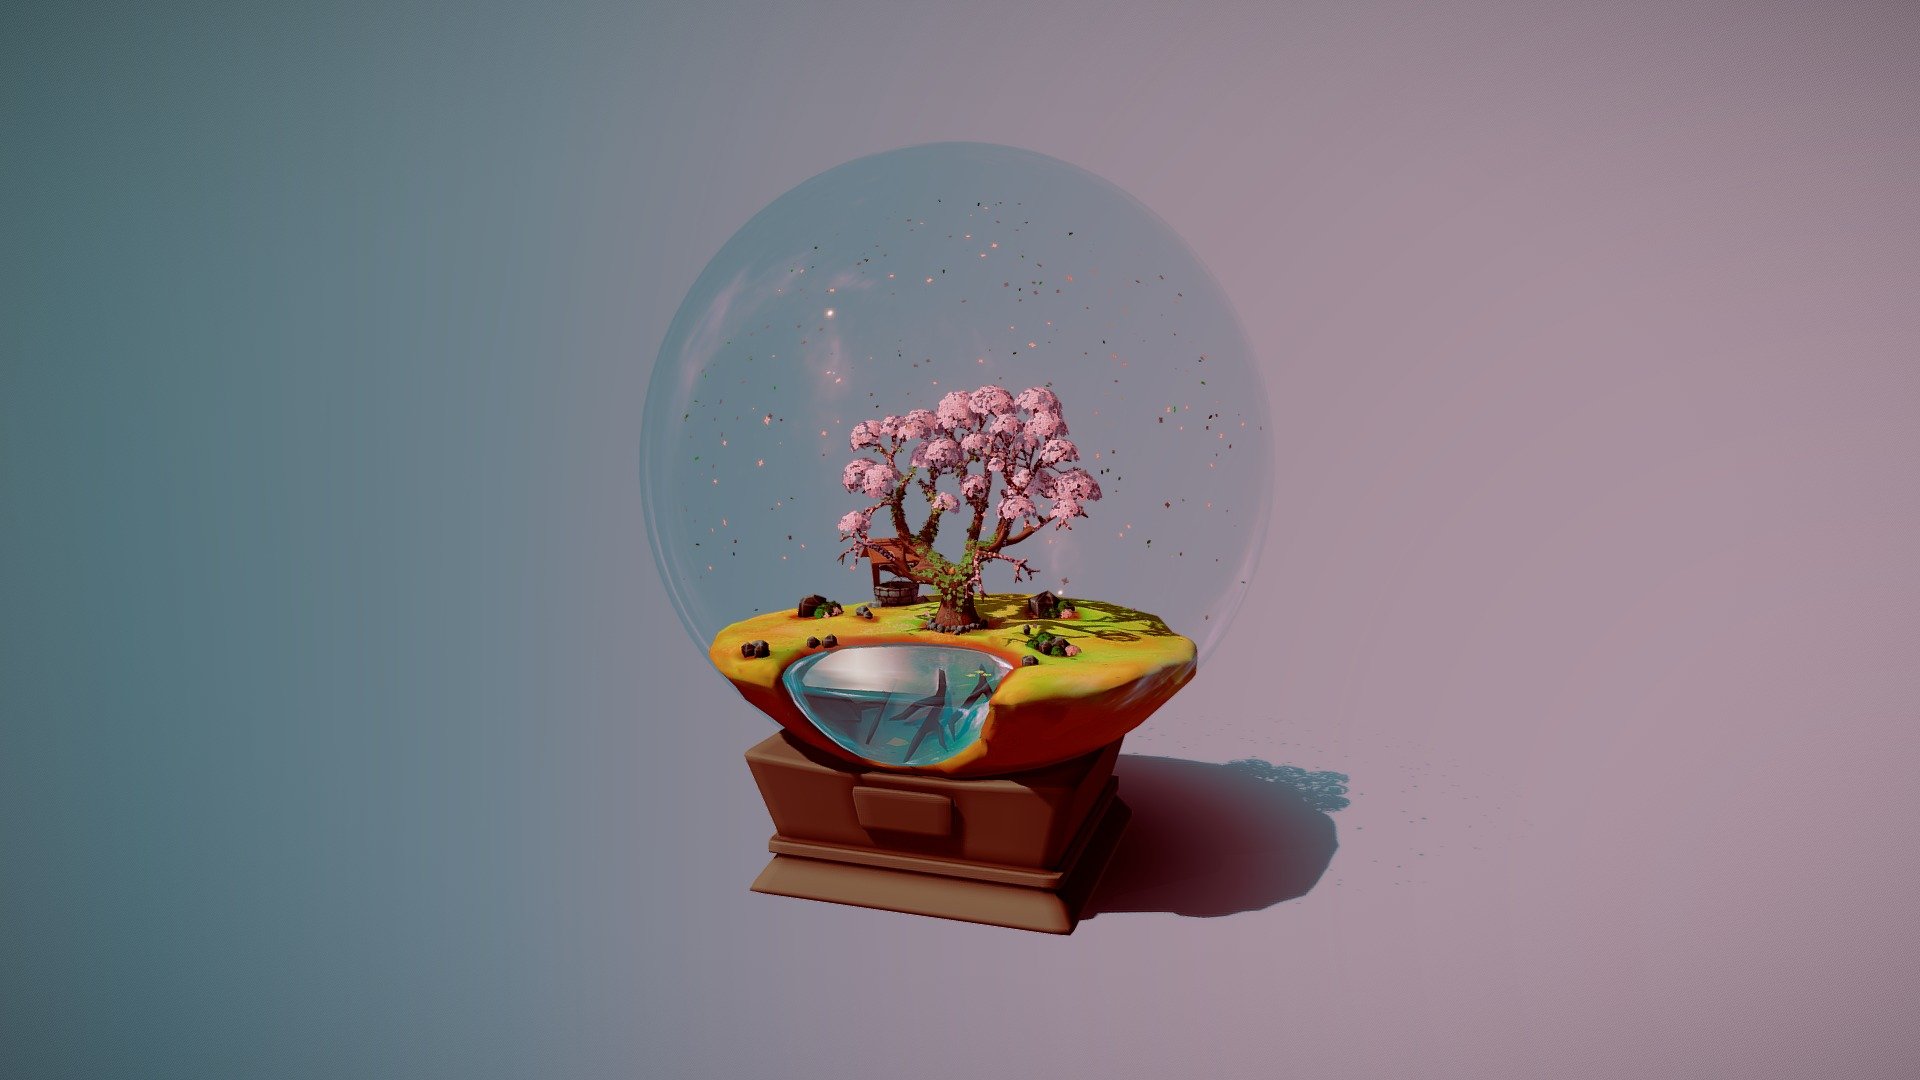 First time enviroment modeling , i wanted to make something cute. made in blender 2.8.  Enjoy! - Fairy-tale Globe - Download Free 3D model by Pelilasdis 3d model